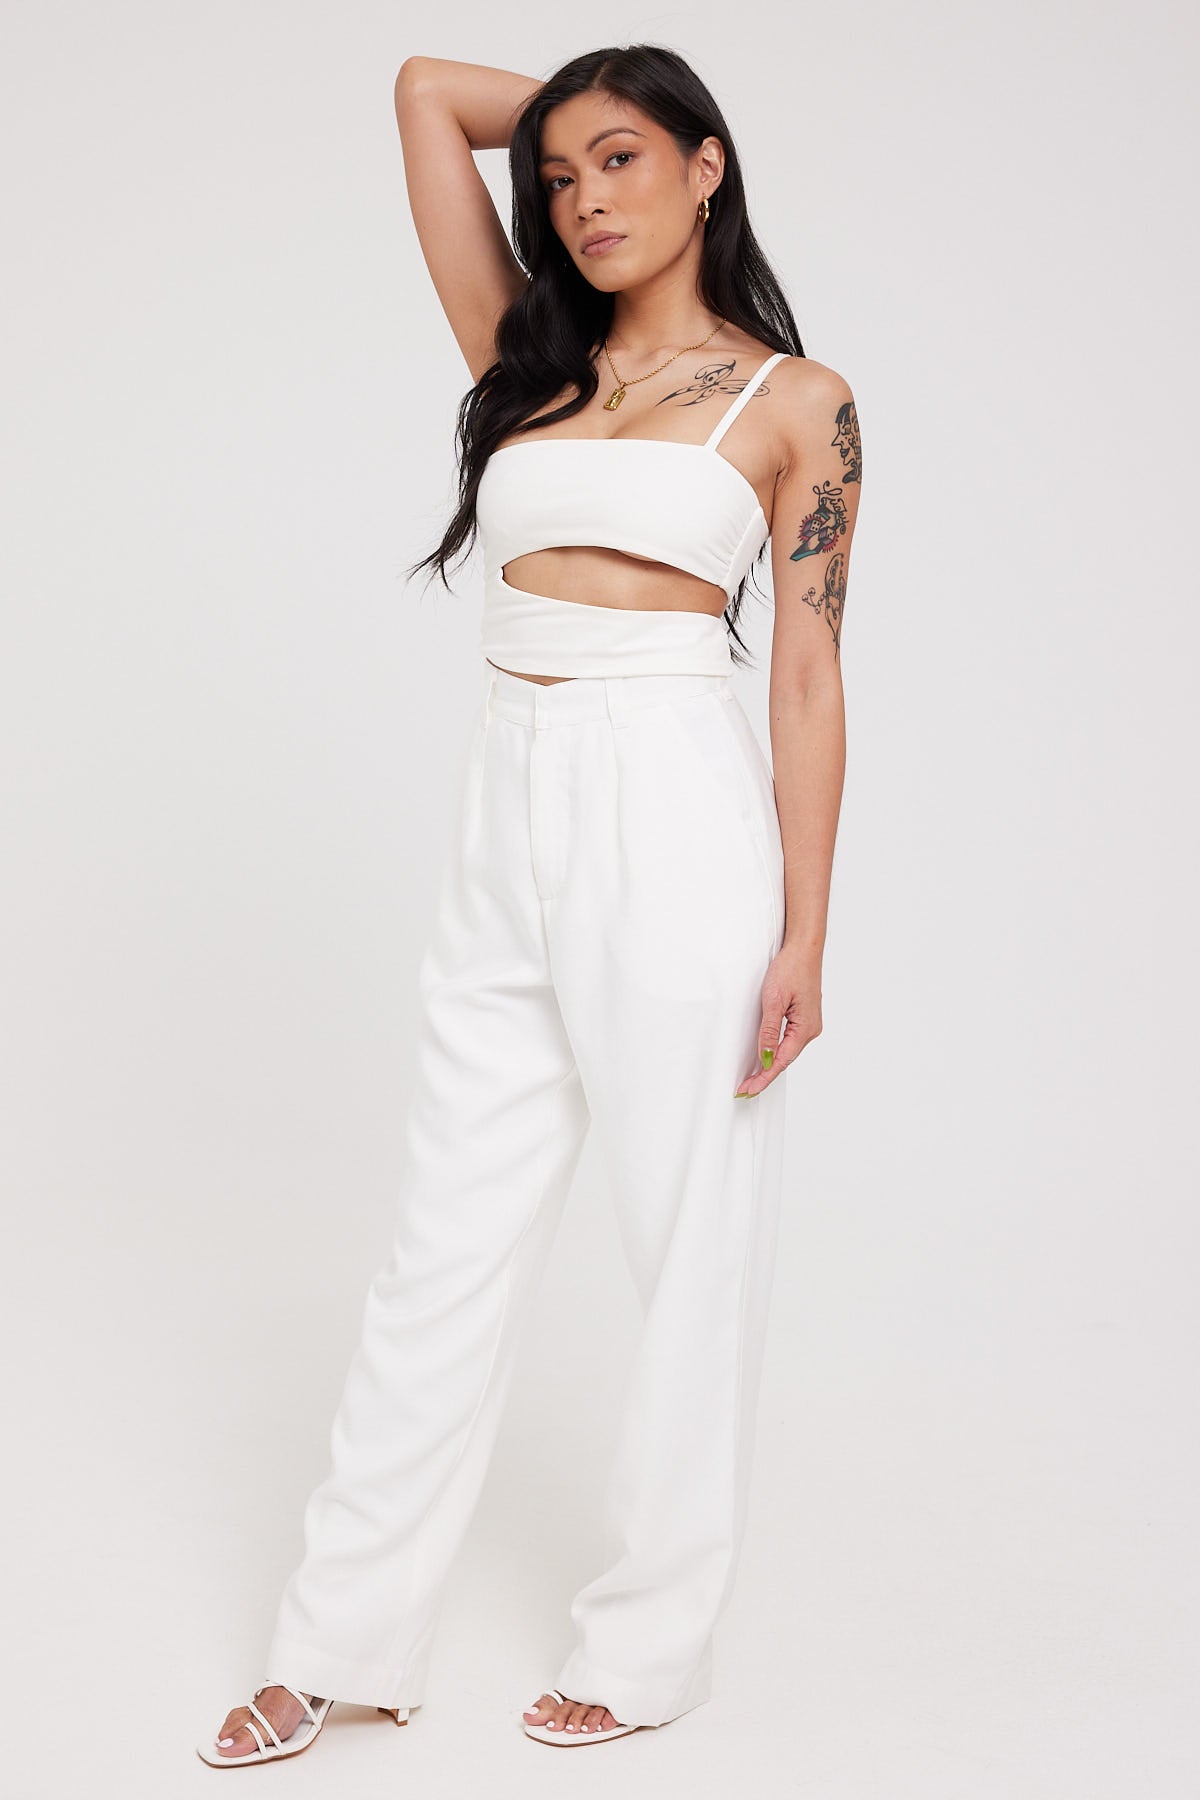 Perfect Stranger Stay With Me Petite Pant White – Universal Store